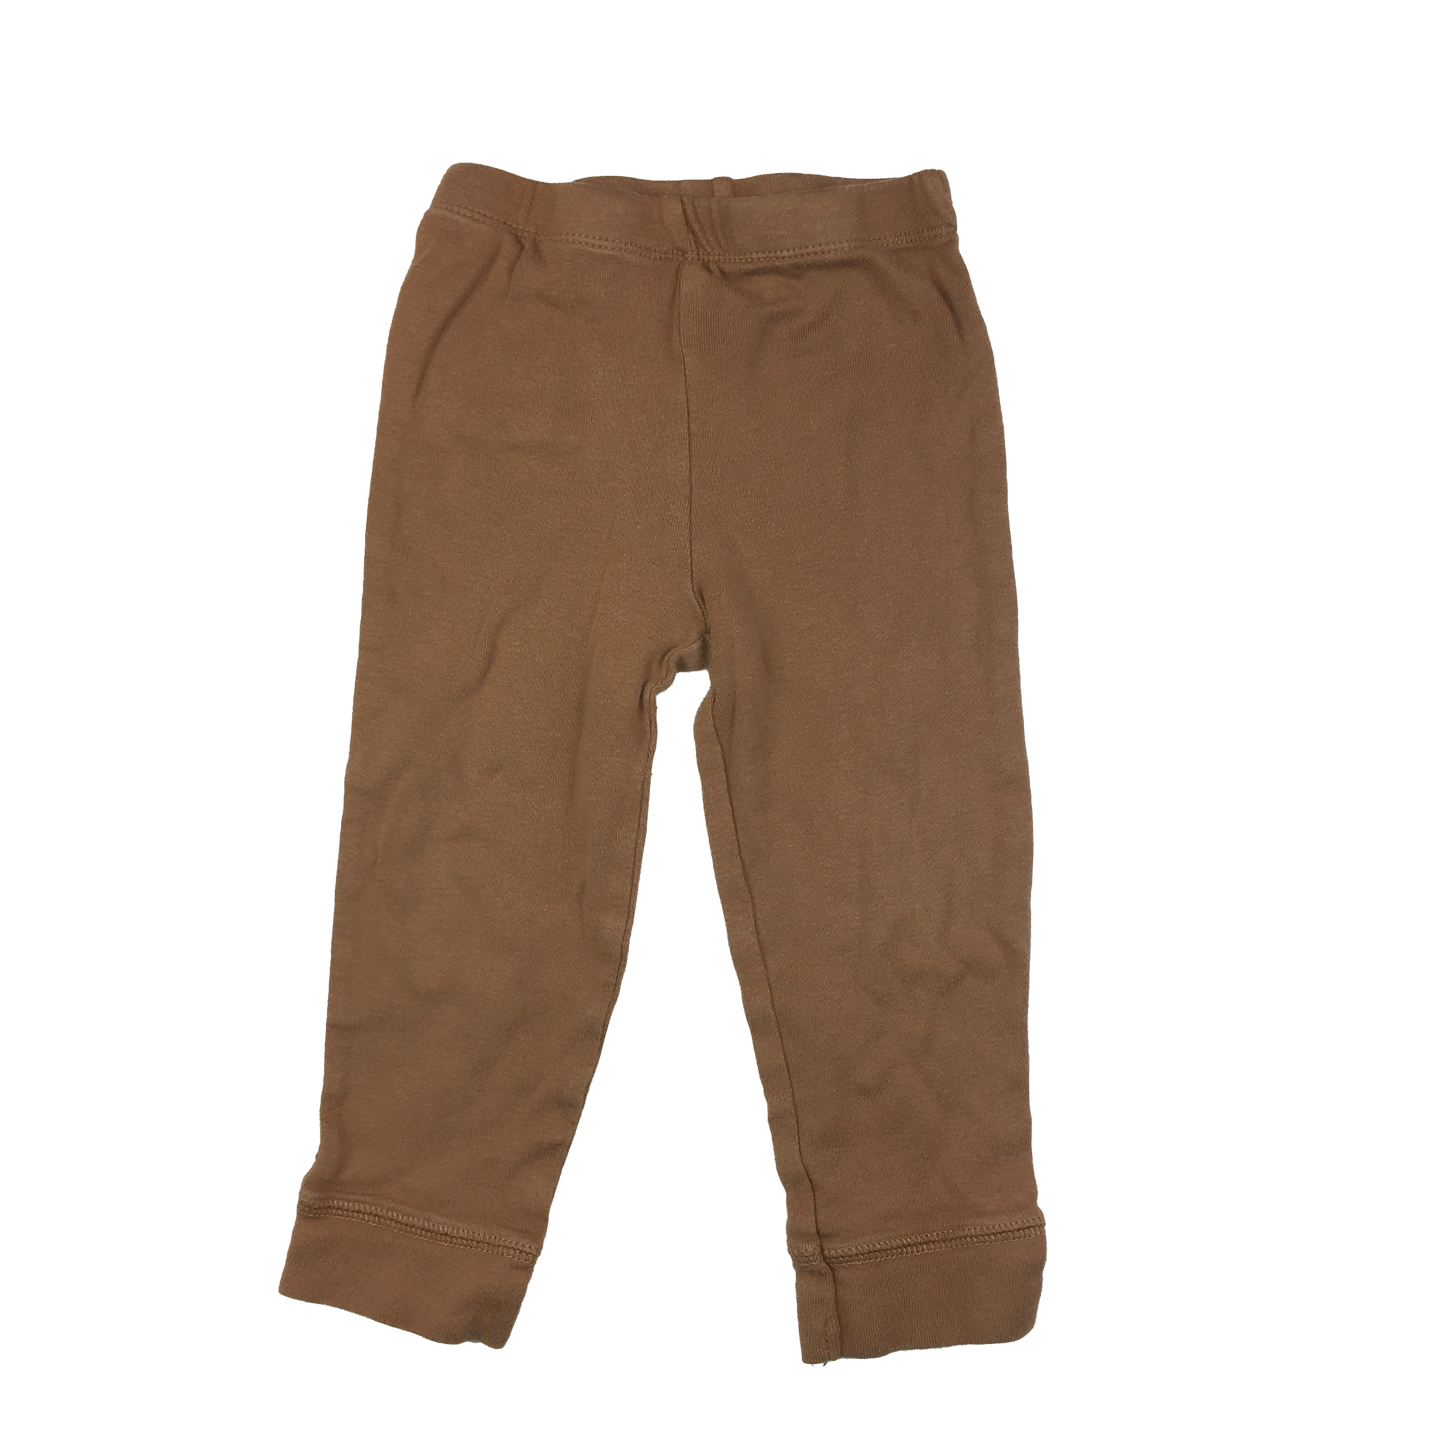 Carter's Tan Pull-On Pants with Back Bear Pocket 24M